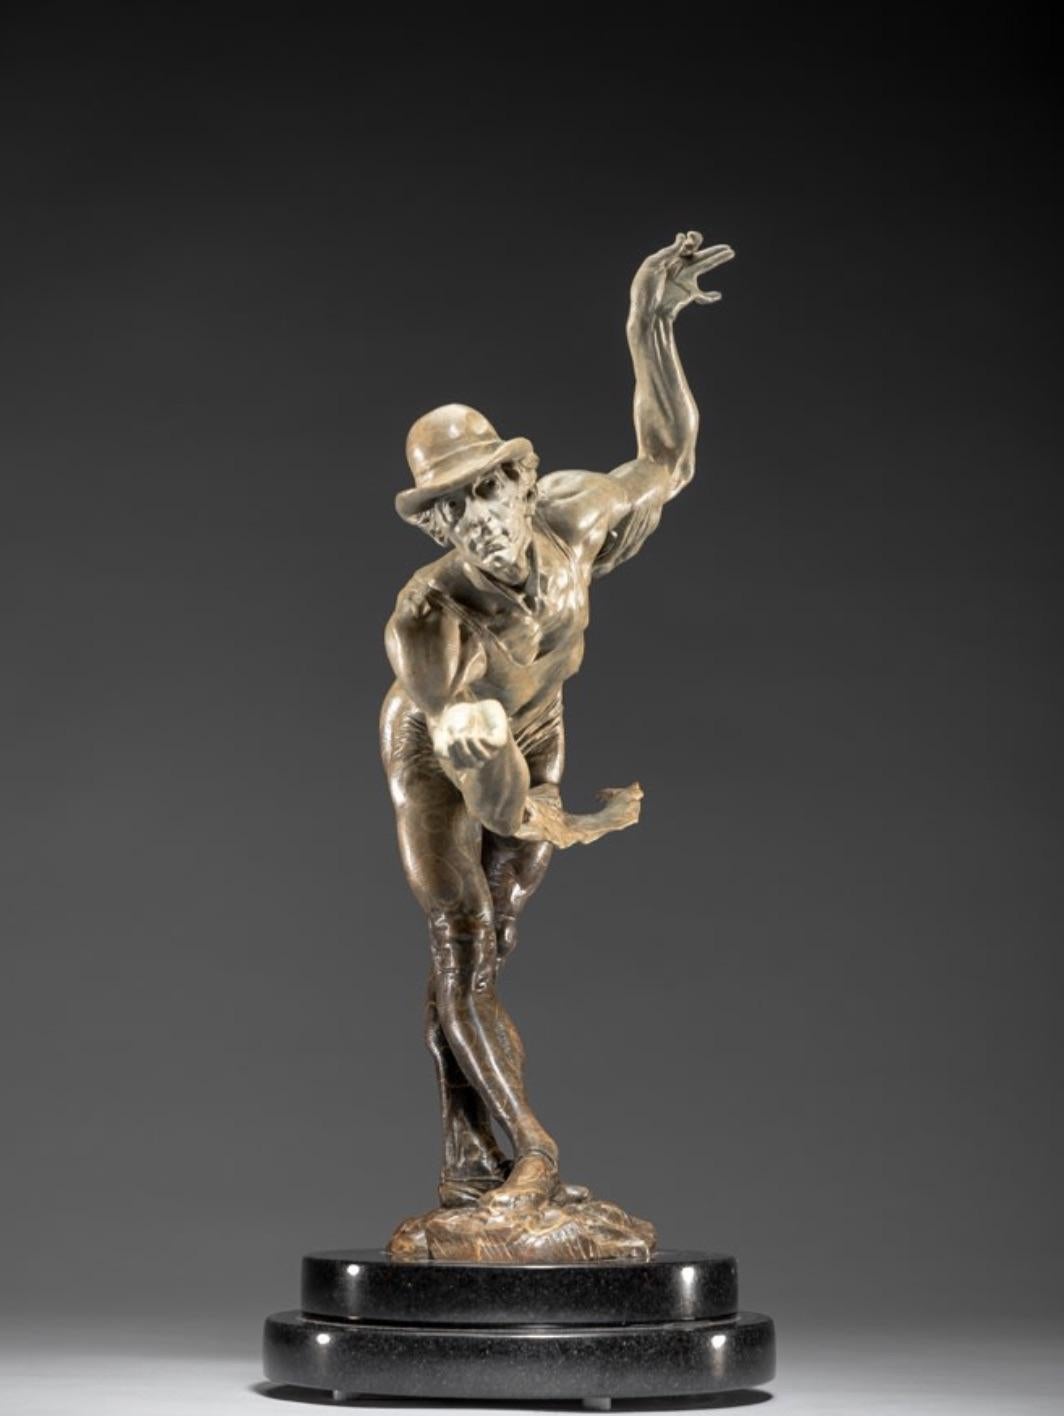 Continuing in the spirit of his classical mimes, Richard MacDonald’s latest work entitled “Rain, Atelier” offers us an experience with rain, wind, movement, and joy. We feel the wind blowing the scarves; we see him holding an imaginary umbrella; we